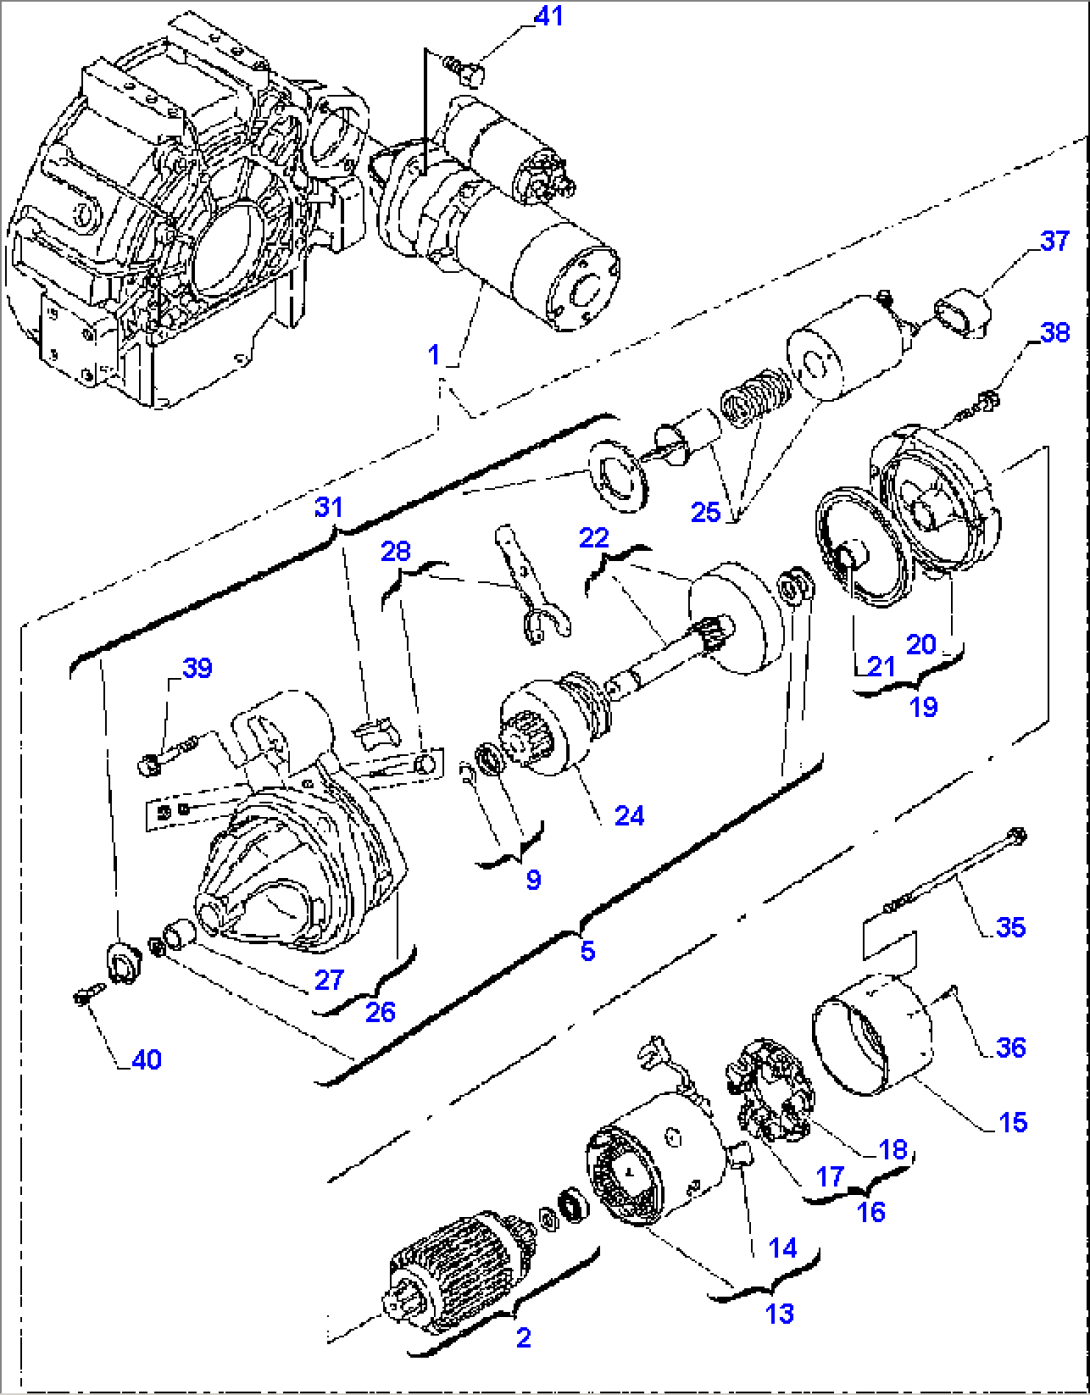 FIG. A0611-03A0 STARTING MOTOR